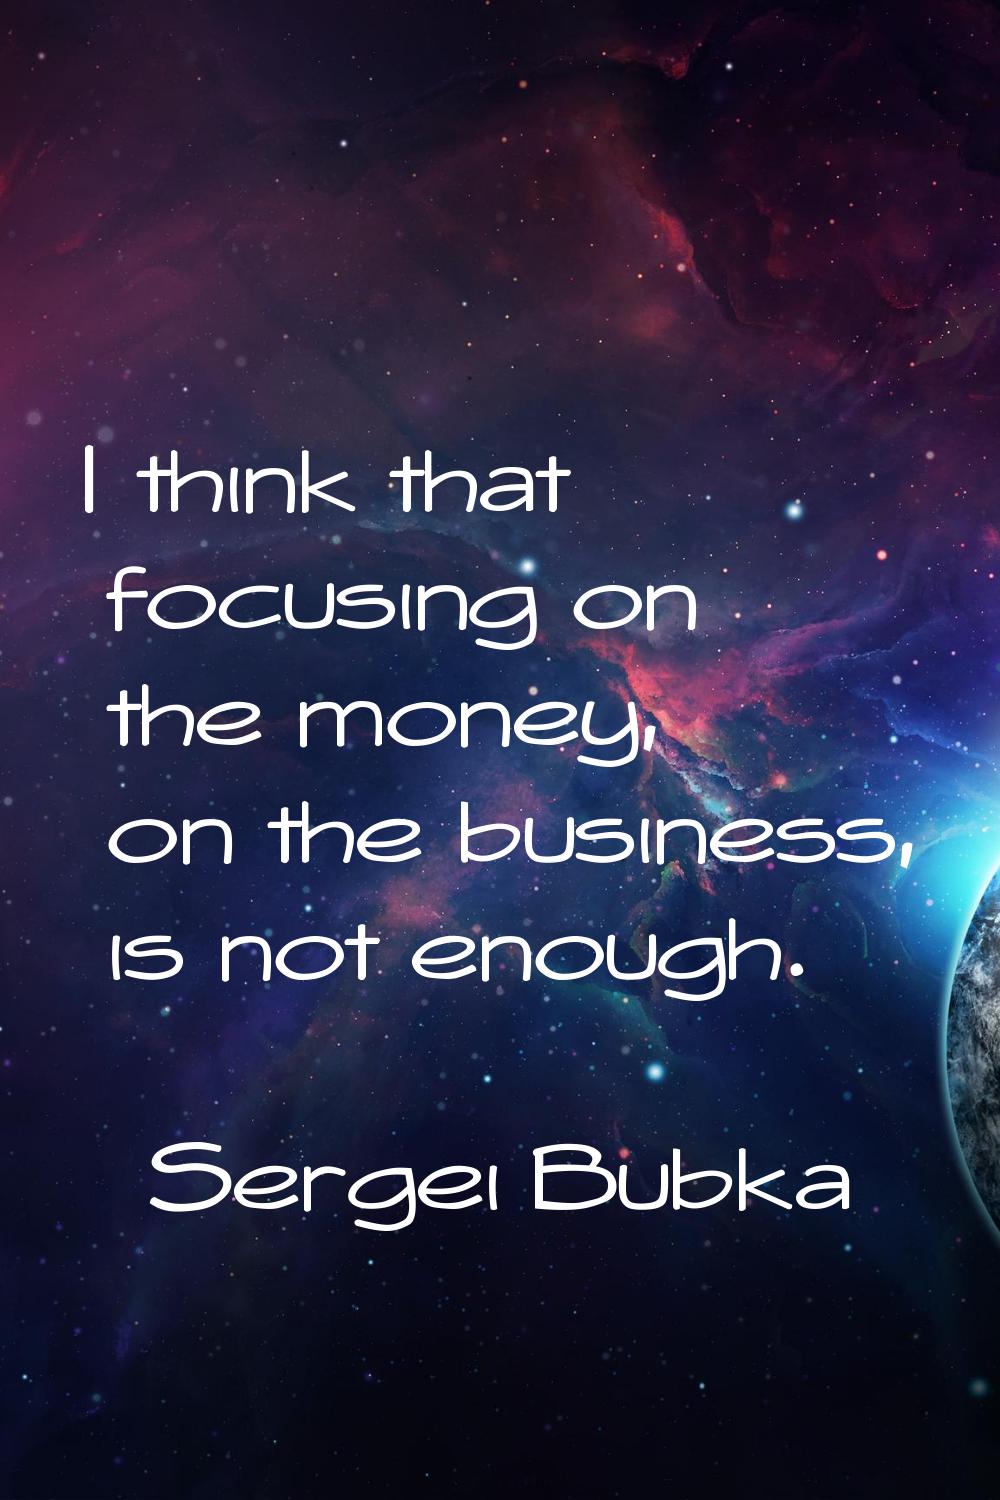 I think that focusing on the money, on the business, is not enough.